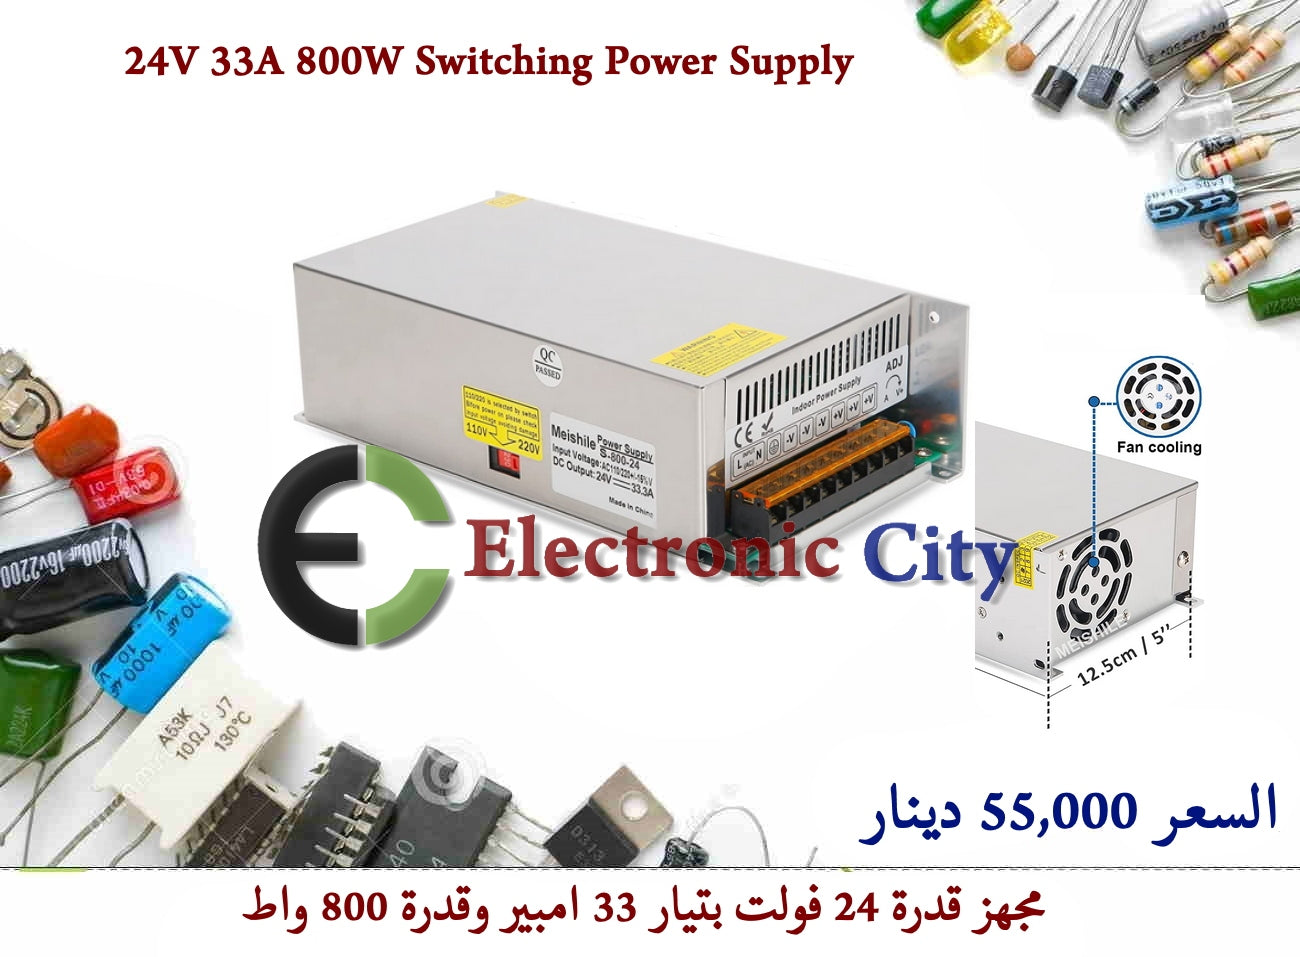 24V 33A 800W Switching Power Supply